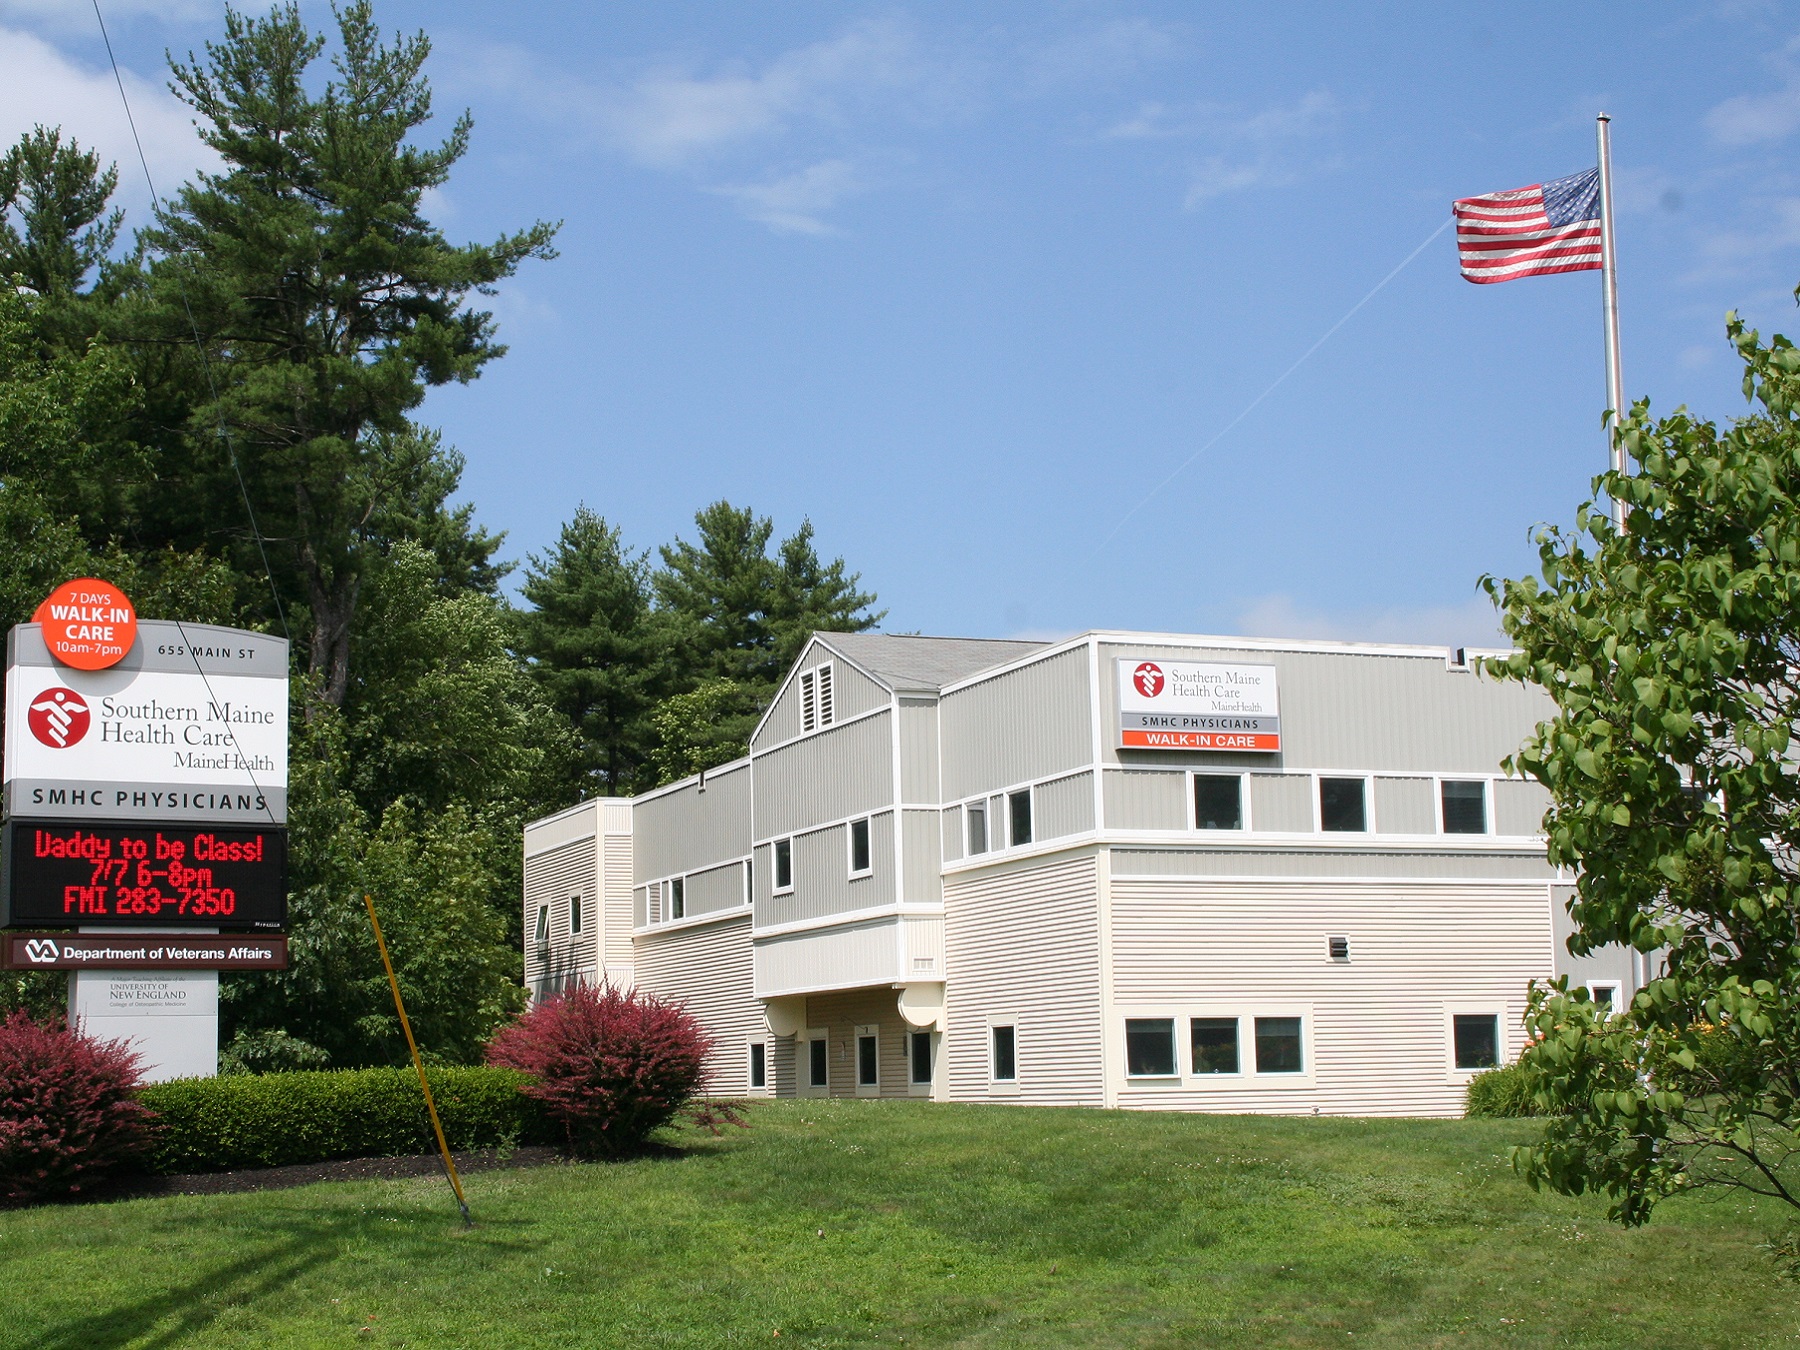 Southern Maine Health Care Is Located At 655 Main St., Saco, ME